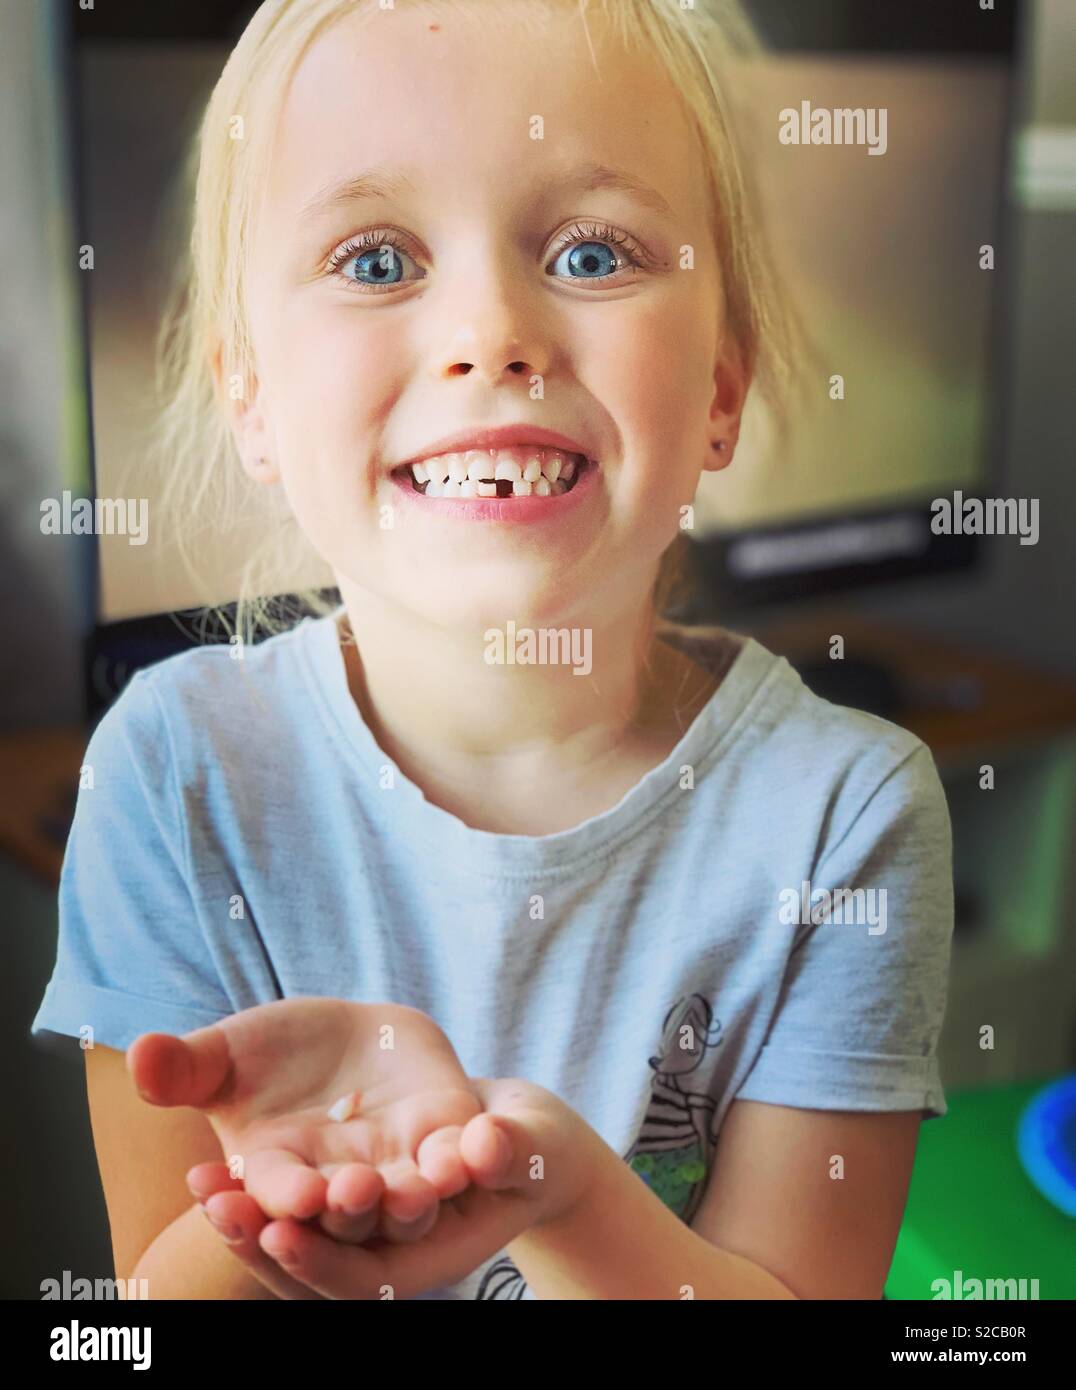 5 year old loosing her first tooth Stock Photo